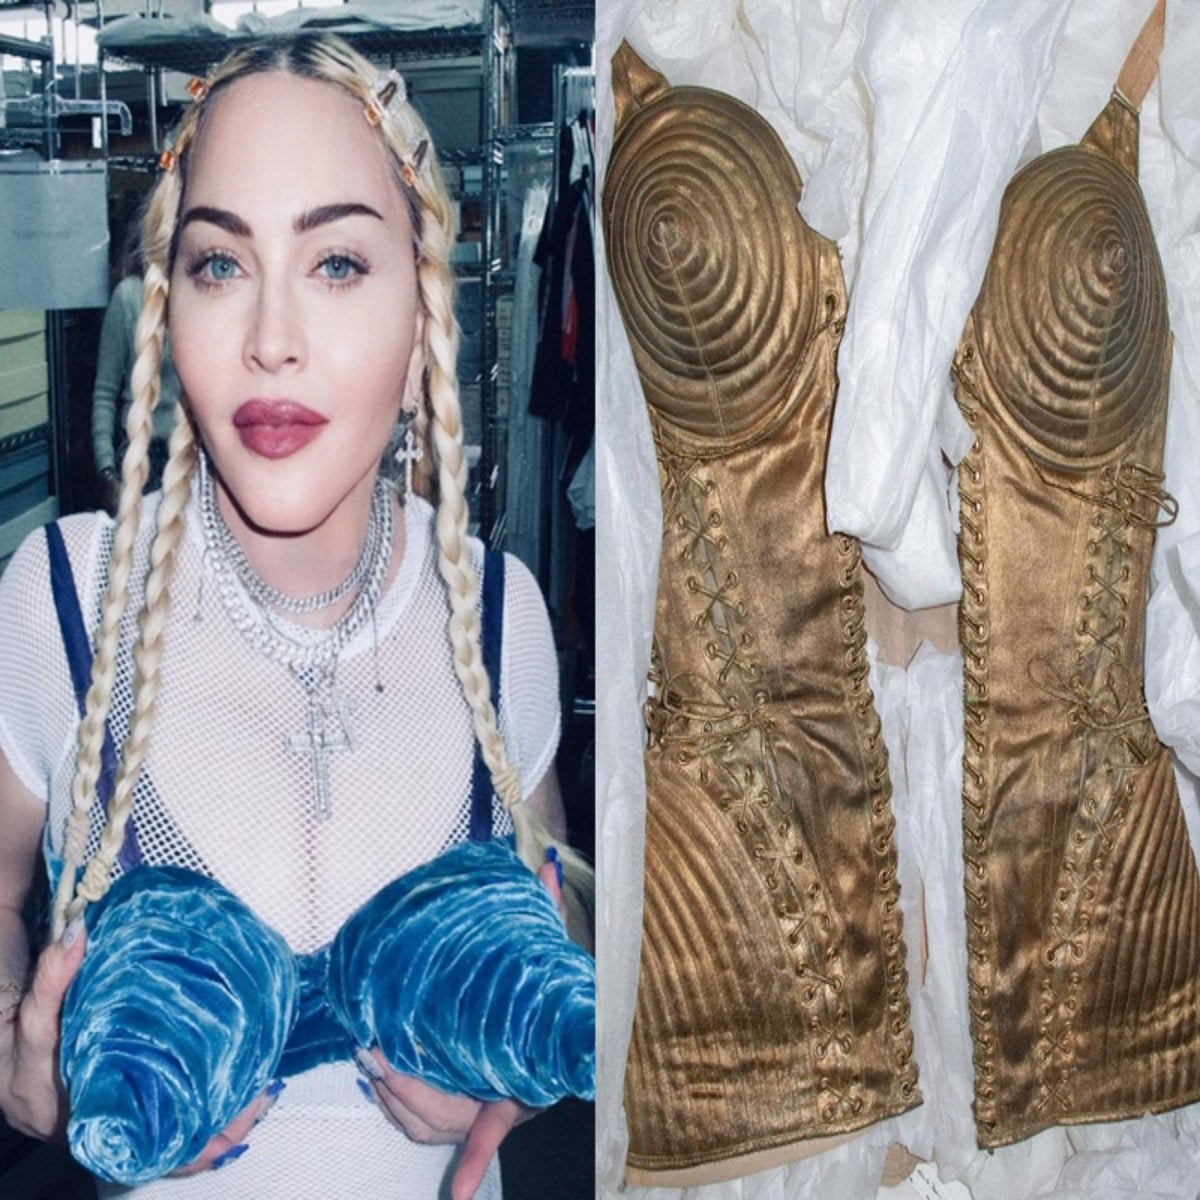 Madonna to bring back iconic cone bra for 2023 Celebration Tour